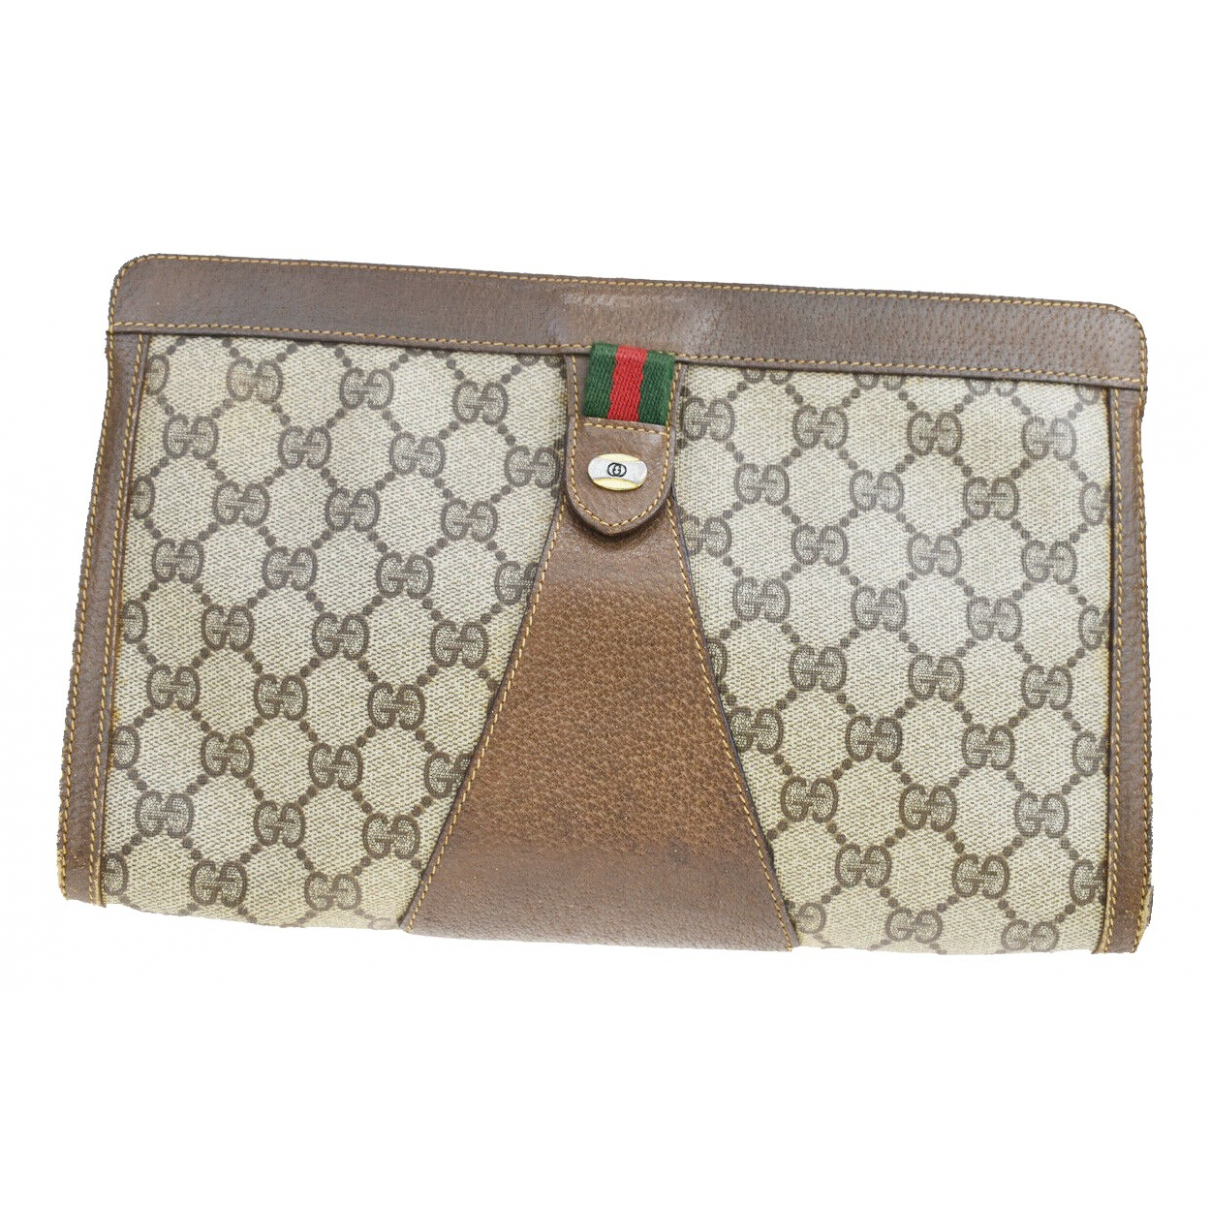 Branded goods Clutch Columbus Mall bag